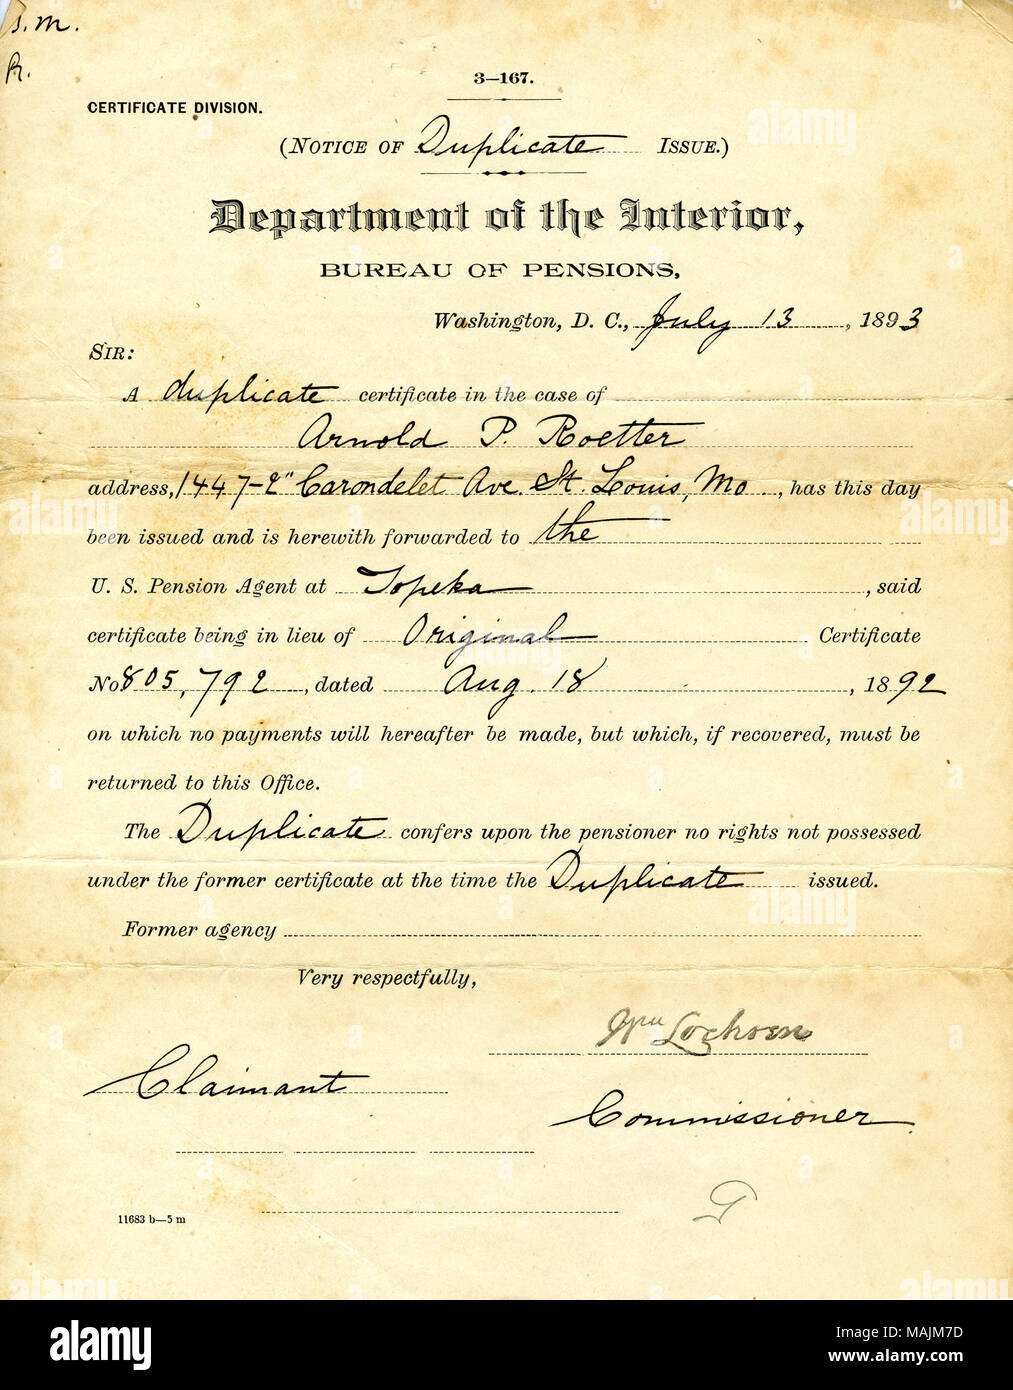 States that a duplicate certificate for Roetter's pension case has been issued and forwarded to the U.S. Pension Agent at Topeka. Title: Printed letter of William Lochsen, Department of the Interior, Bureau of Pensions, Washington, D.C., to Arthur P. Roetter, Carondelet Ave., St. Louis, Mo., July 13, 1893  . 13 July 1893. Lochsen, William Stock Photo